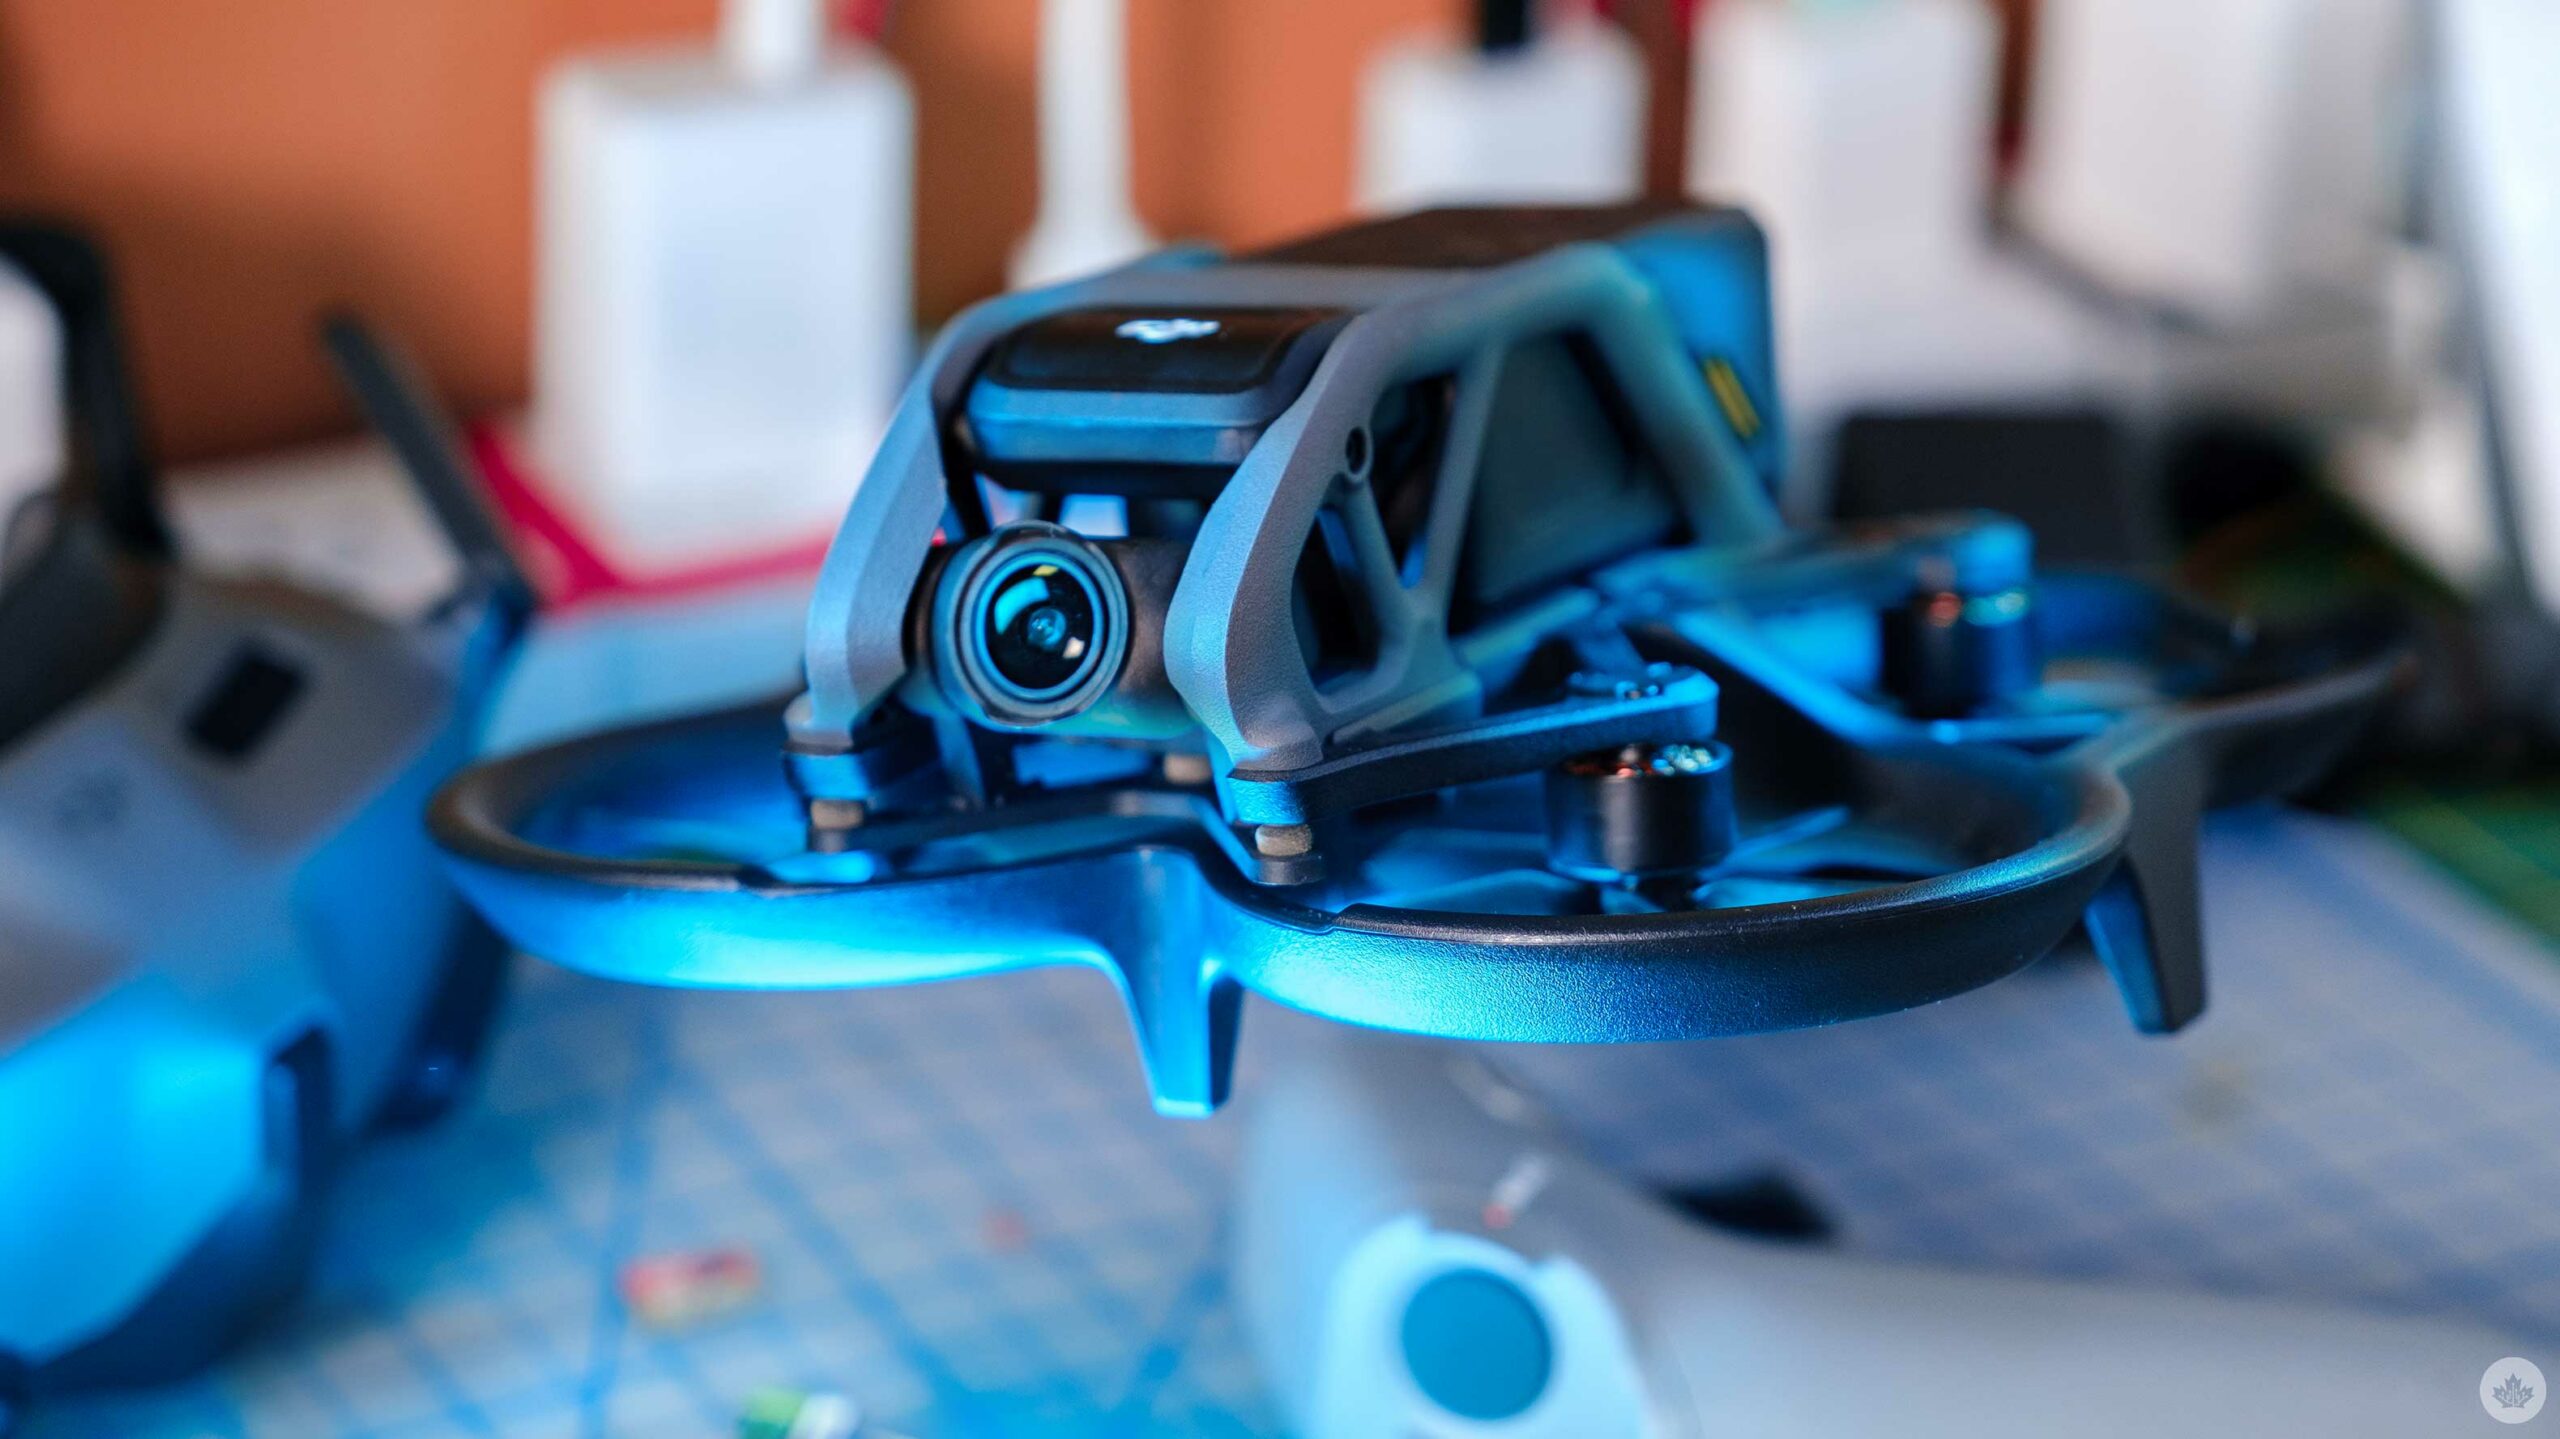 DJI Avata and Motion Controller hands-on: Beginner drone?